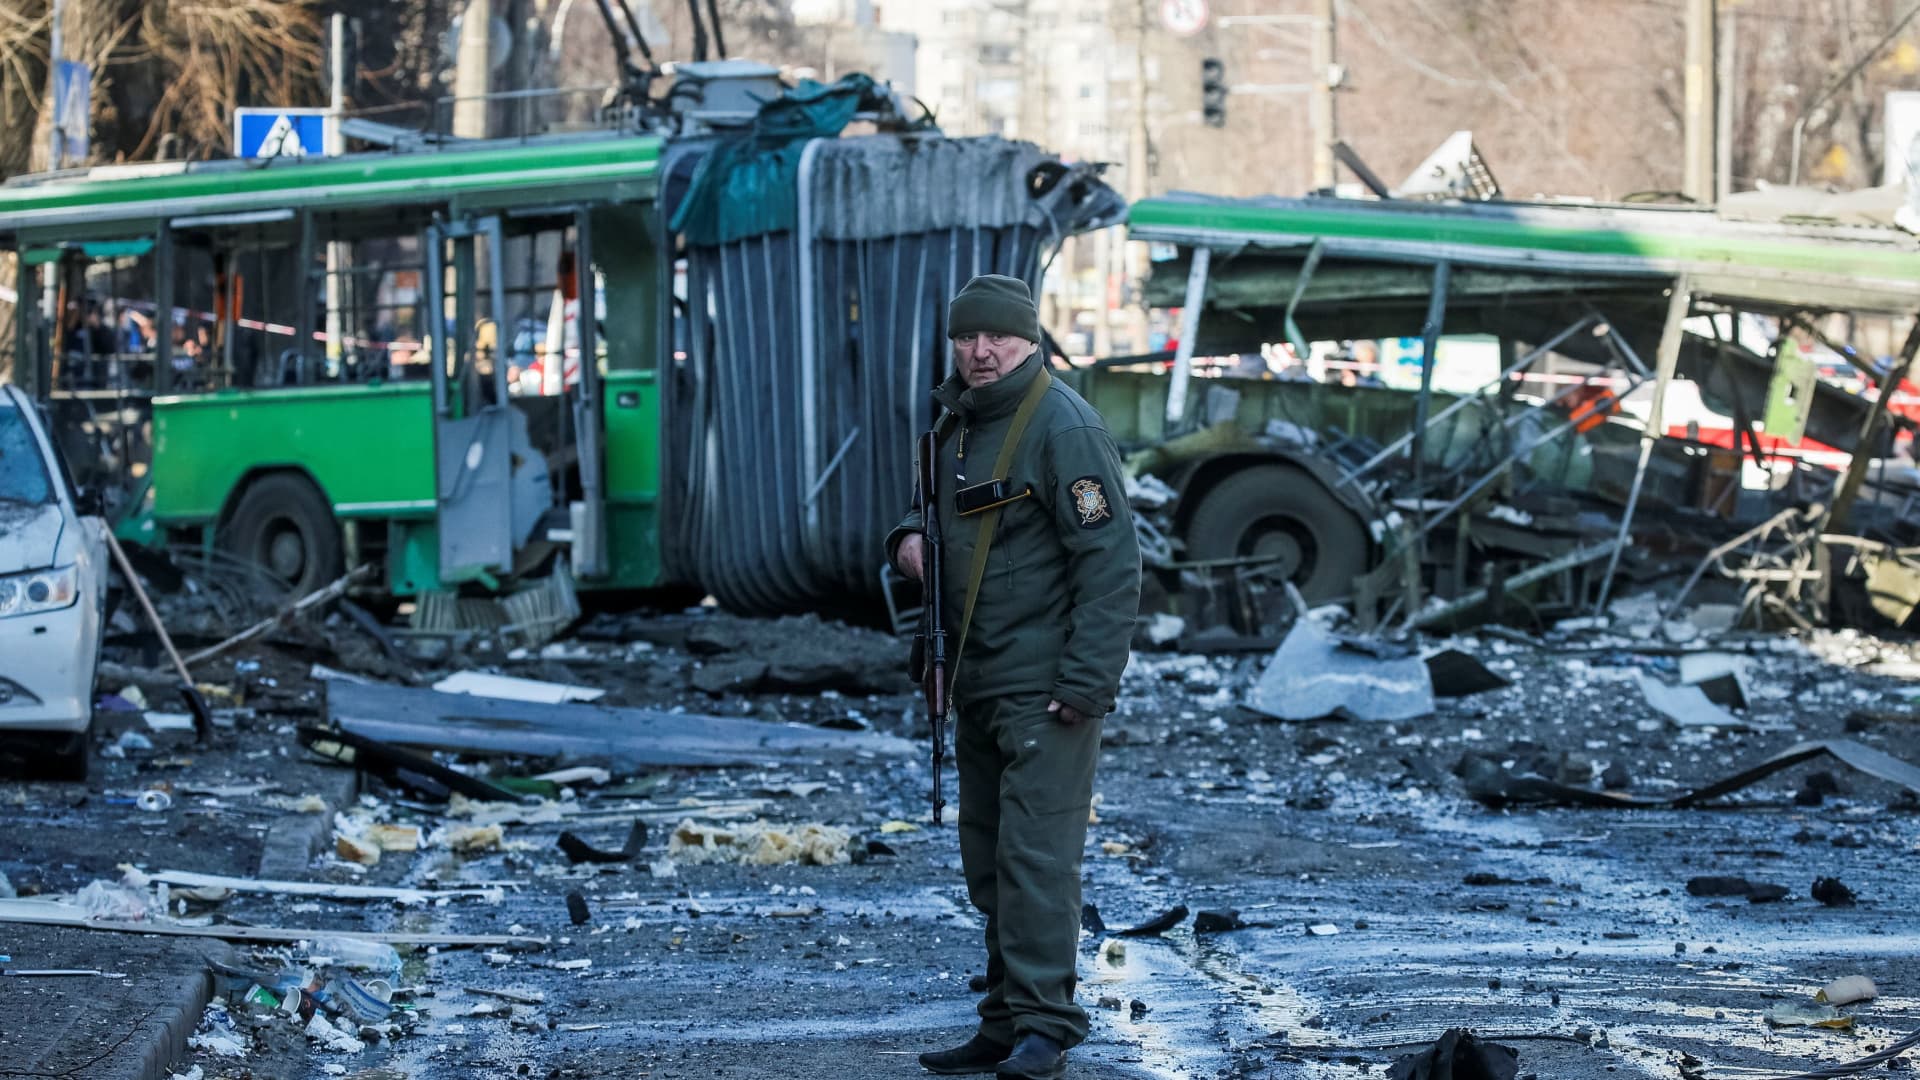 A police officer guards an area around a building destroyed by shelling as Russia's attack on Ukraine continues, in Kyiv, Ukraine March 14, 2022.